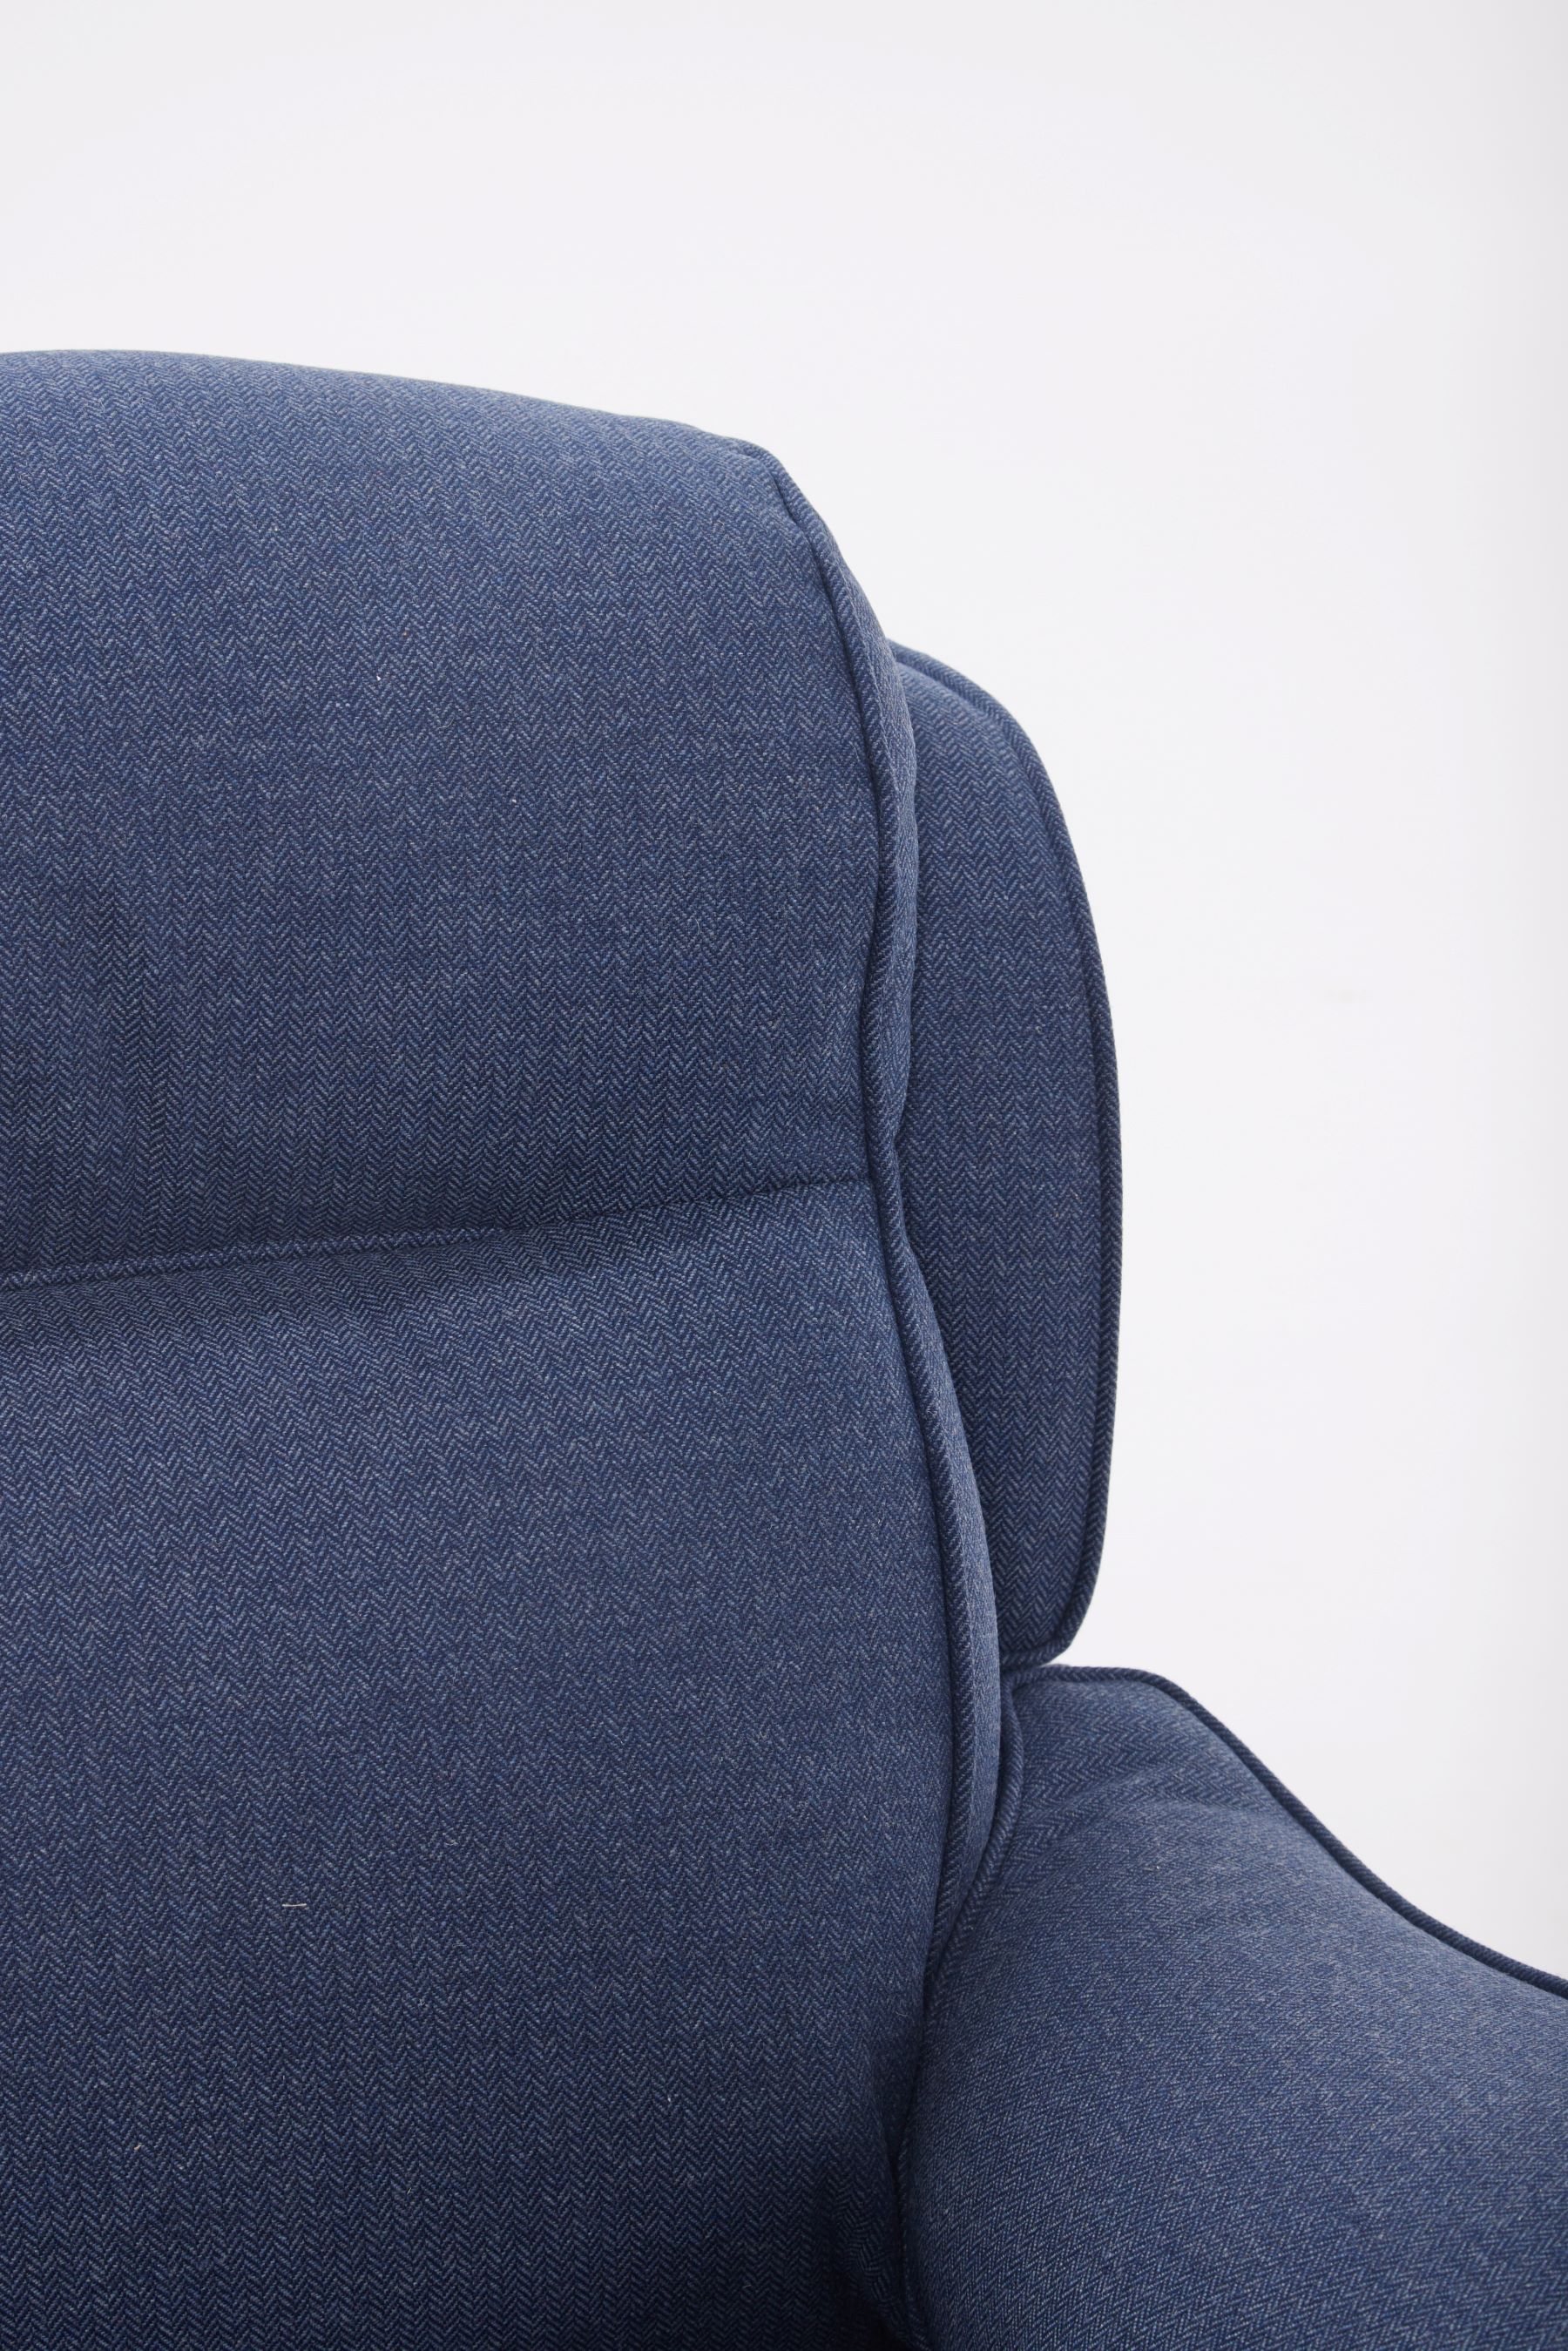 Parker Knoll Boston Rise and Recline Armchair Farland Navy